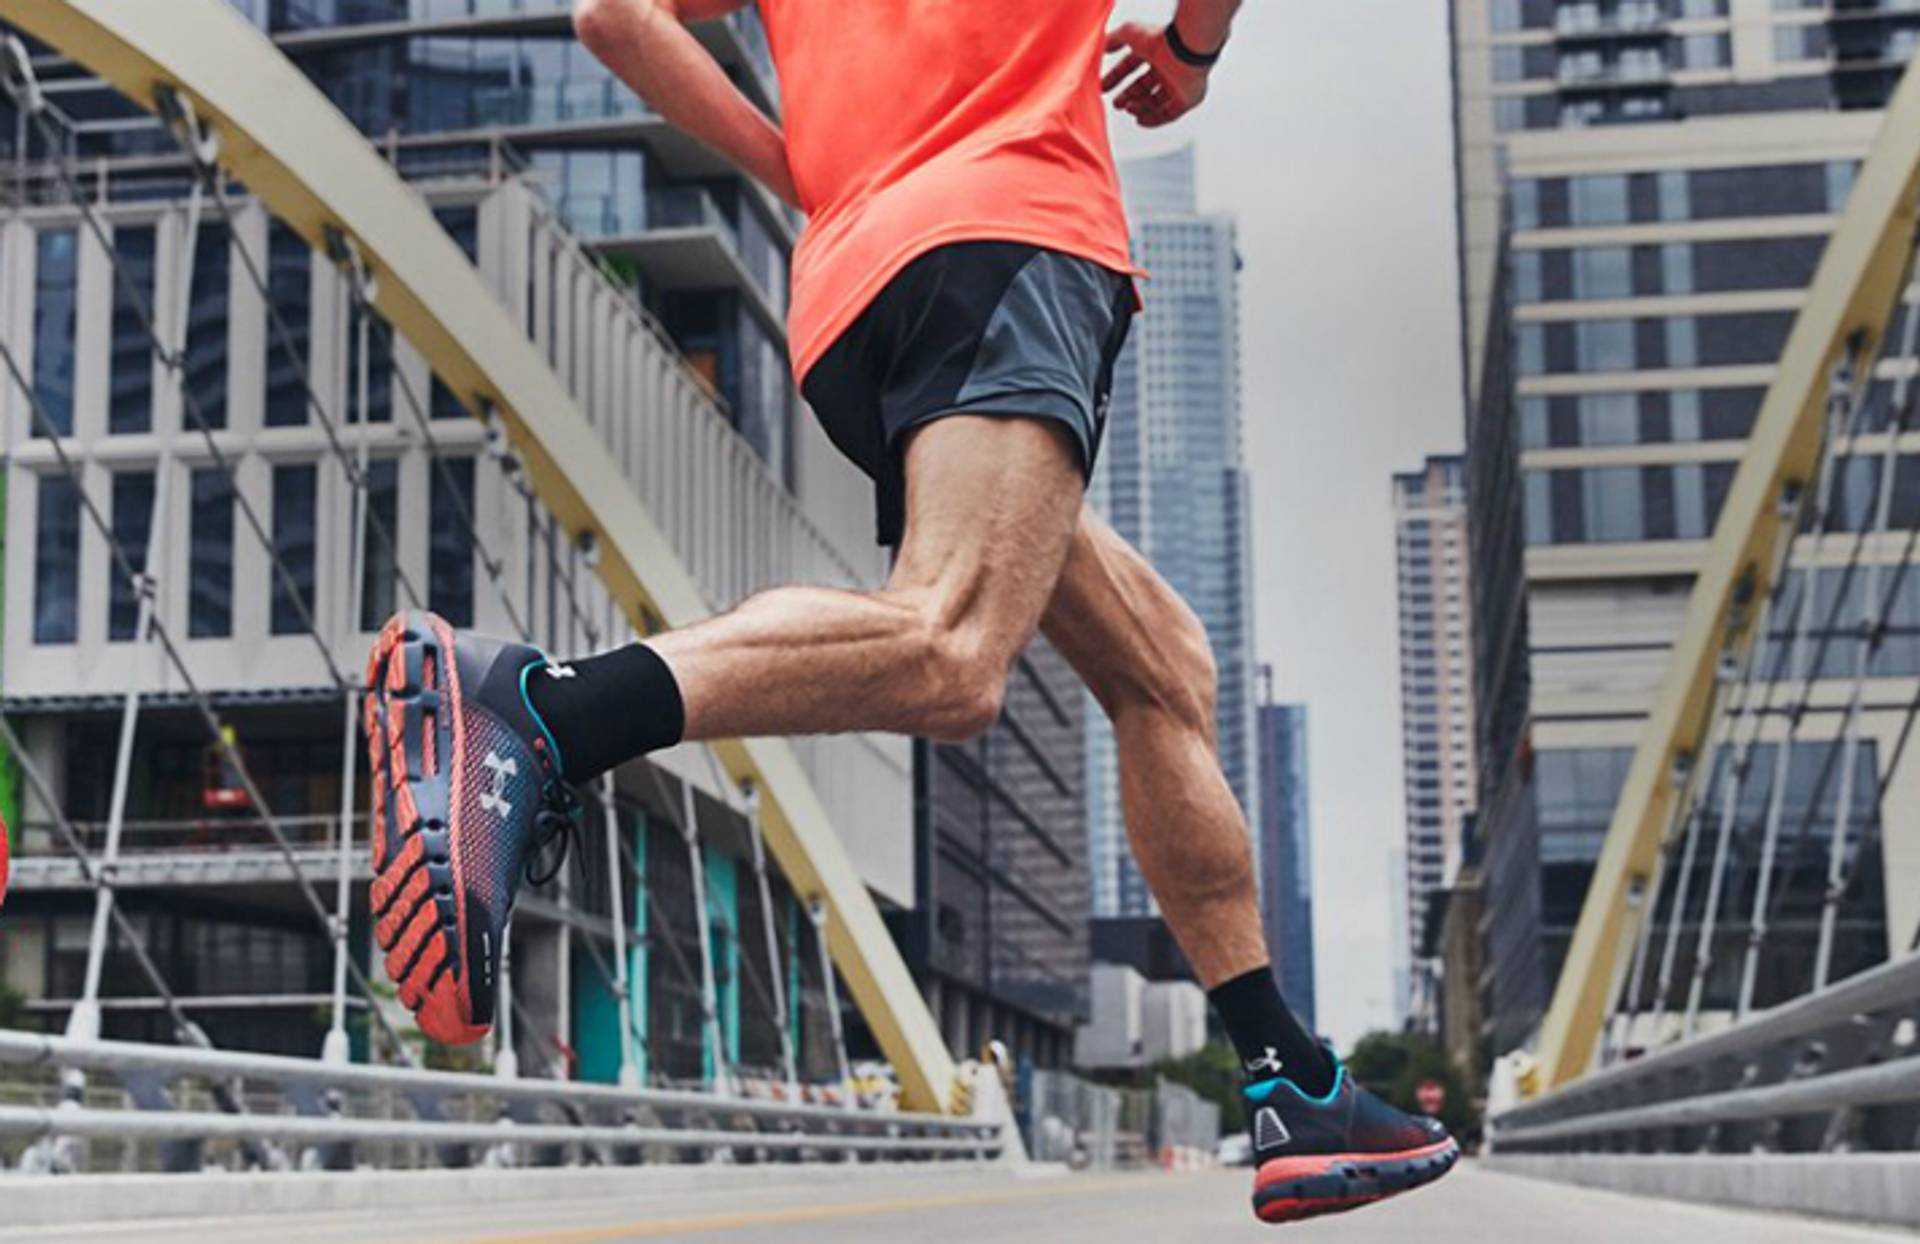 Under Armour smart shoes help runners avoid injury